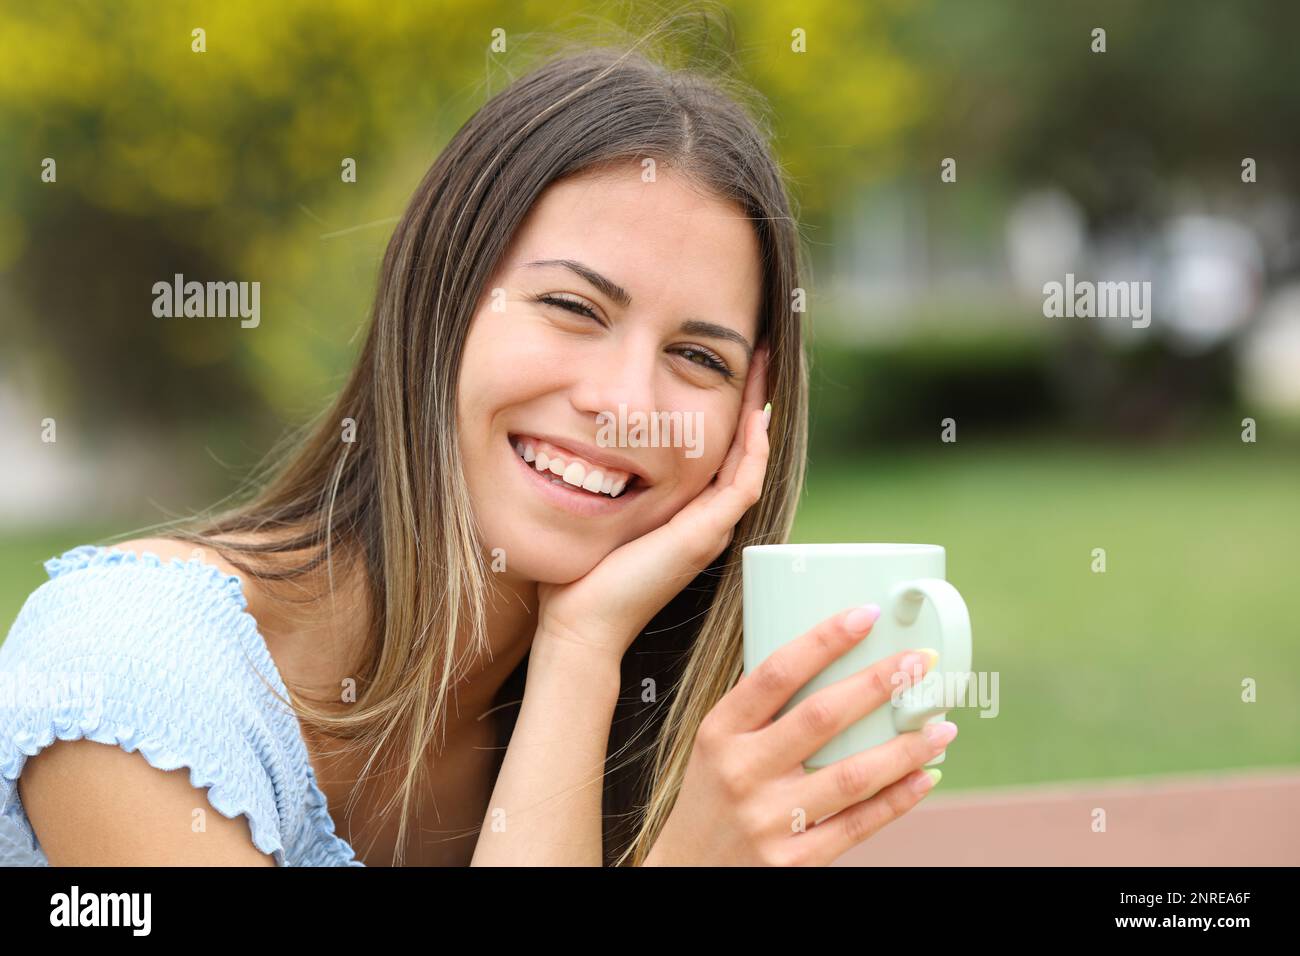 Candid happy teen looks at you holding coffee mug in a park Stock Photo